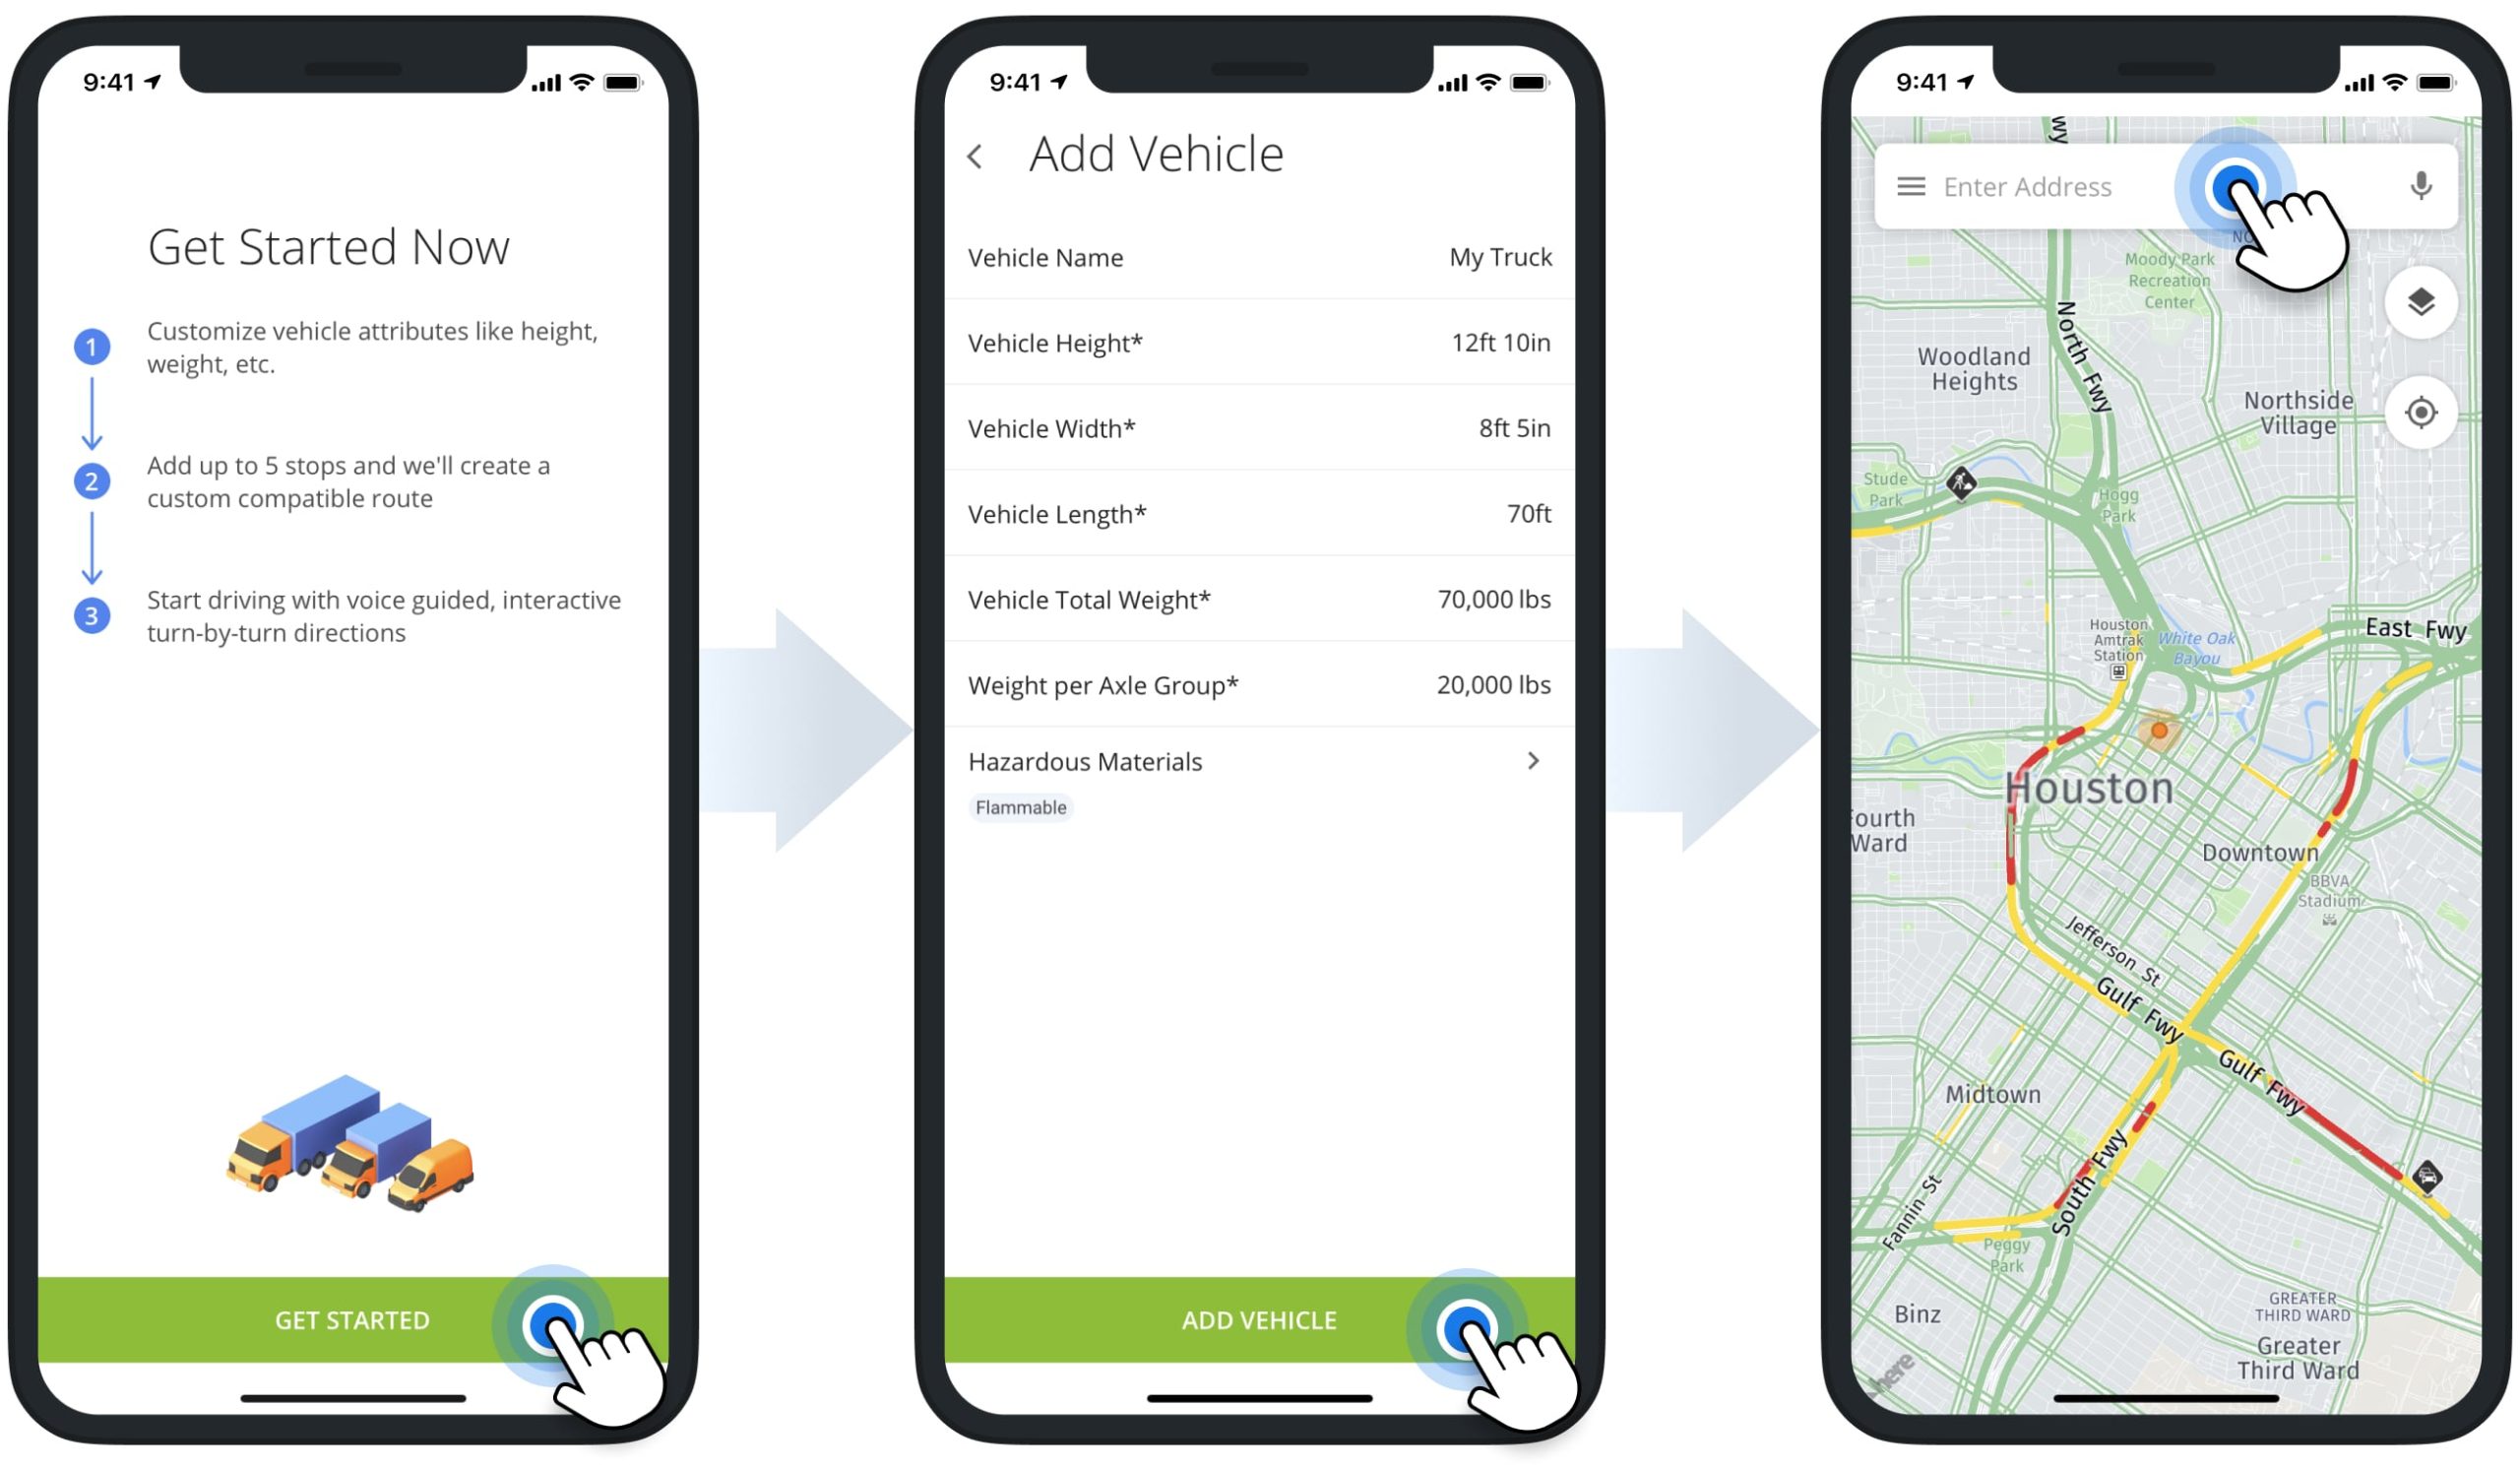 Set up the Route4Trucks app and add commercial vehicle parameters for truck route planning.